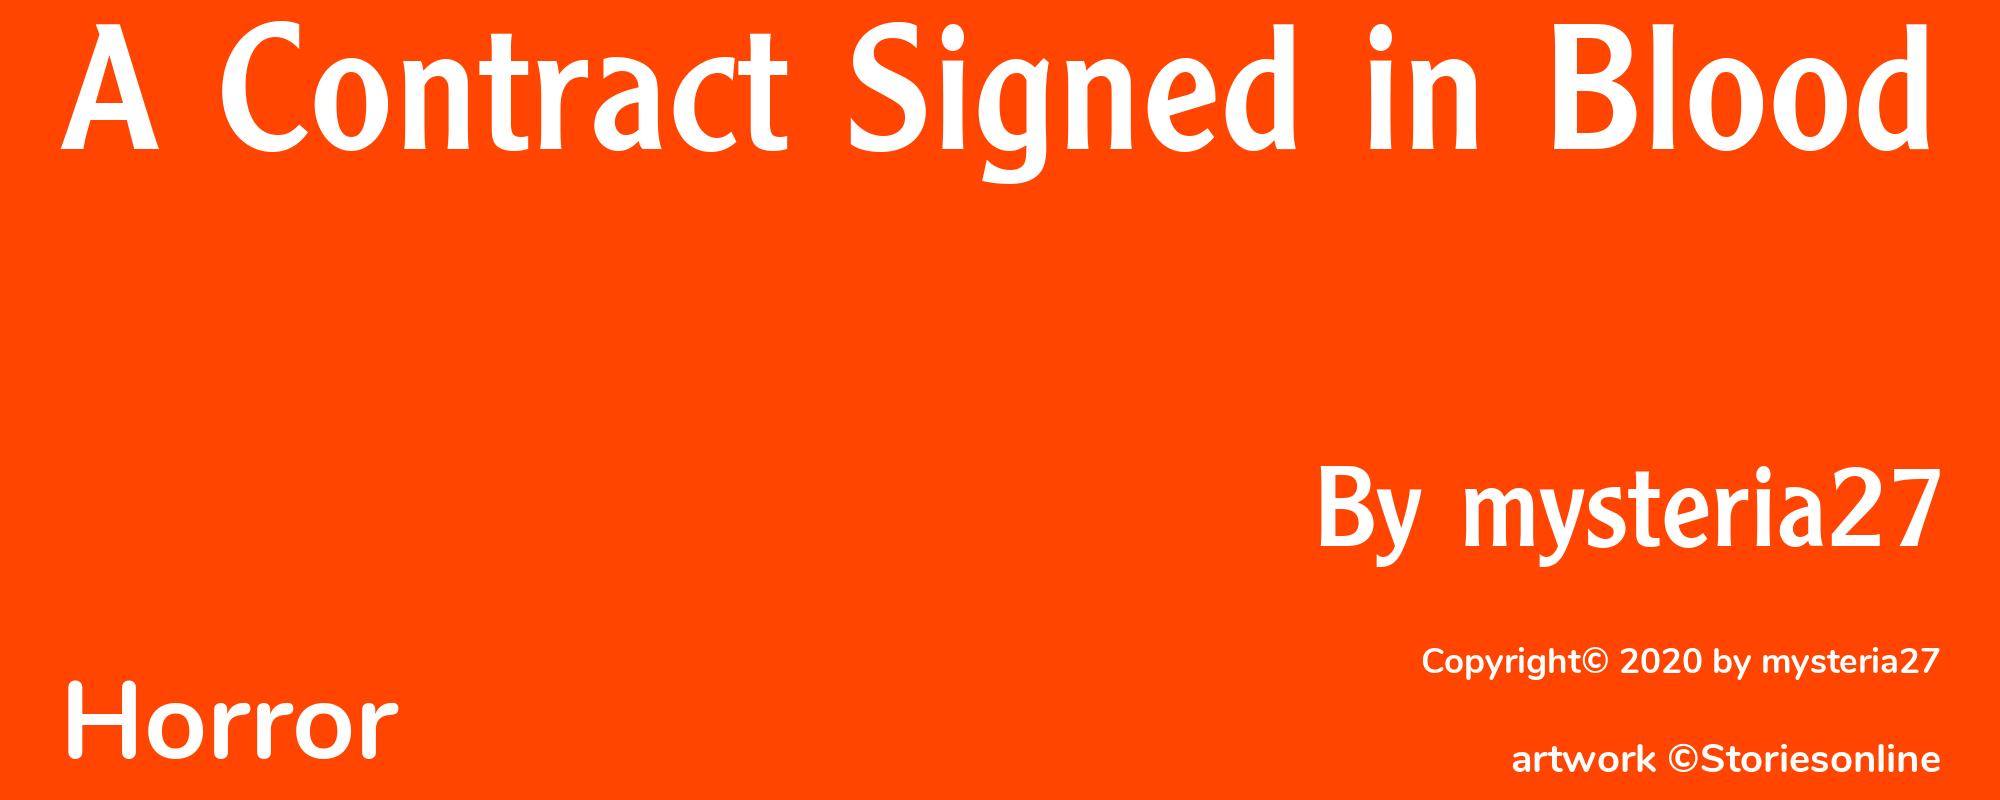 A Contract Signed in Blood - Cover